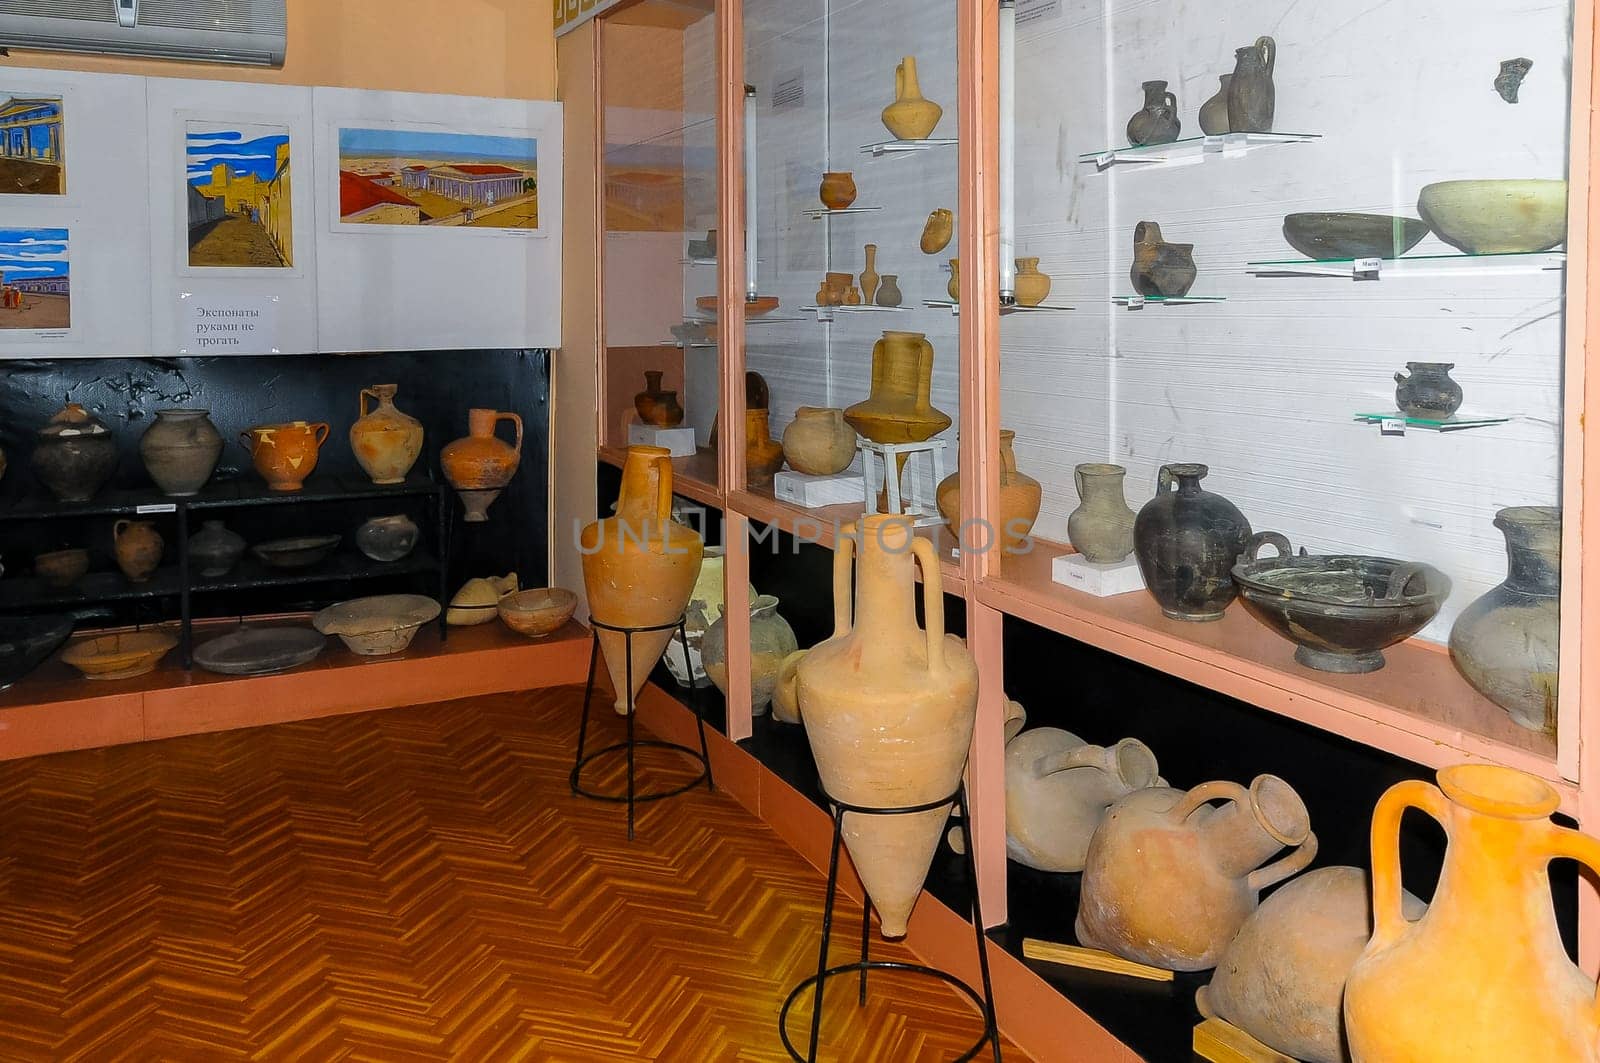 exhibits from excavations inside the museum at the archaeological site of the ancient Greek city of Olbia, Ukraine by Hydrobiolog